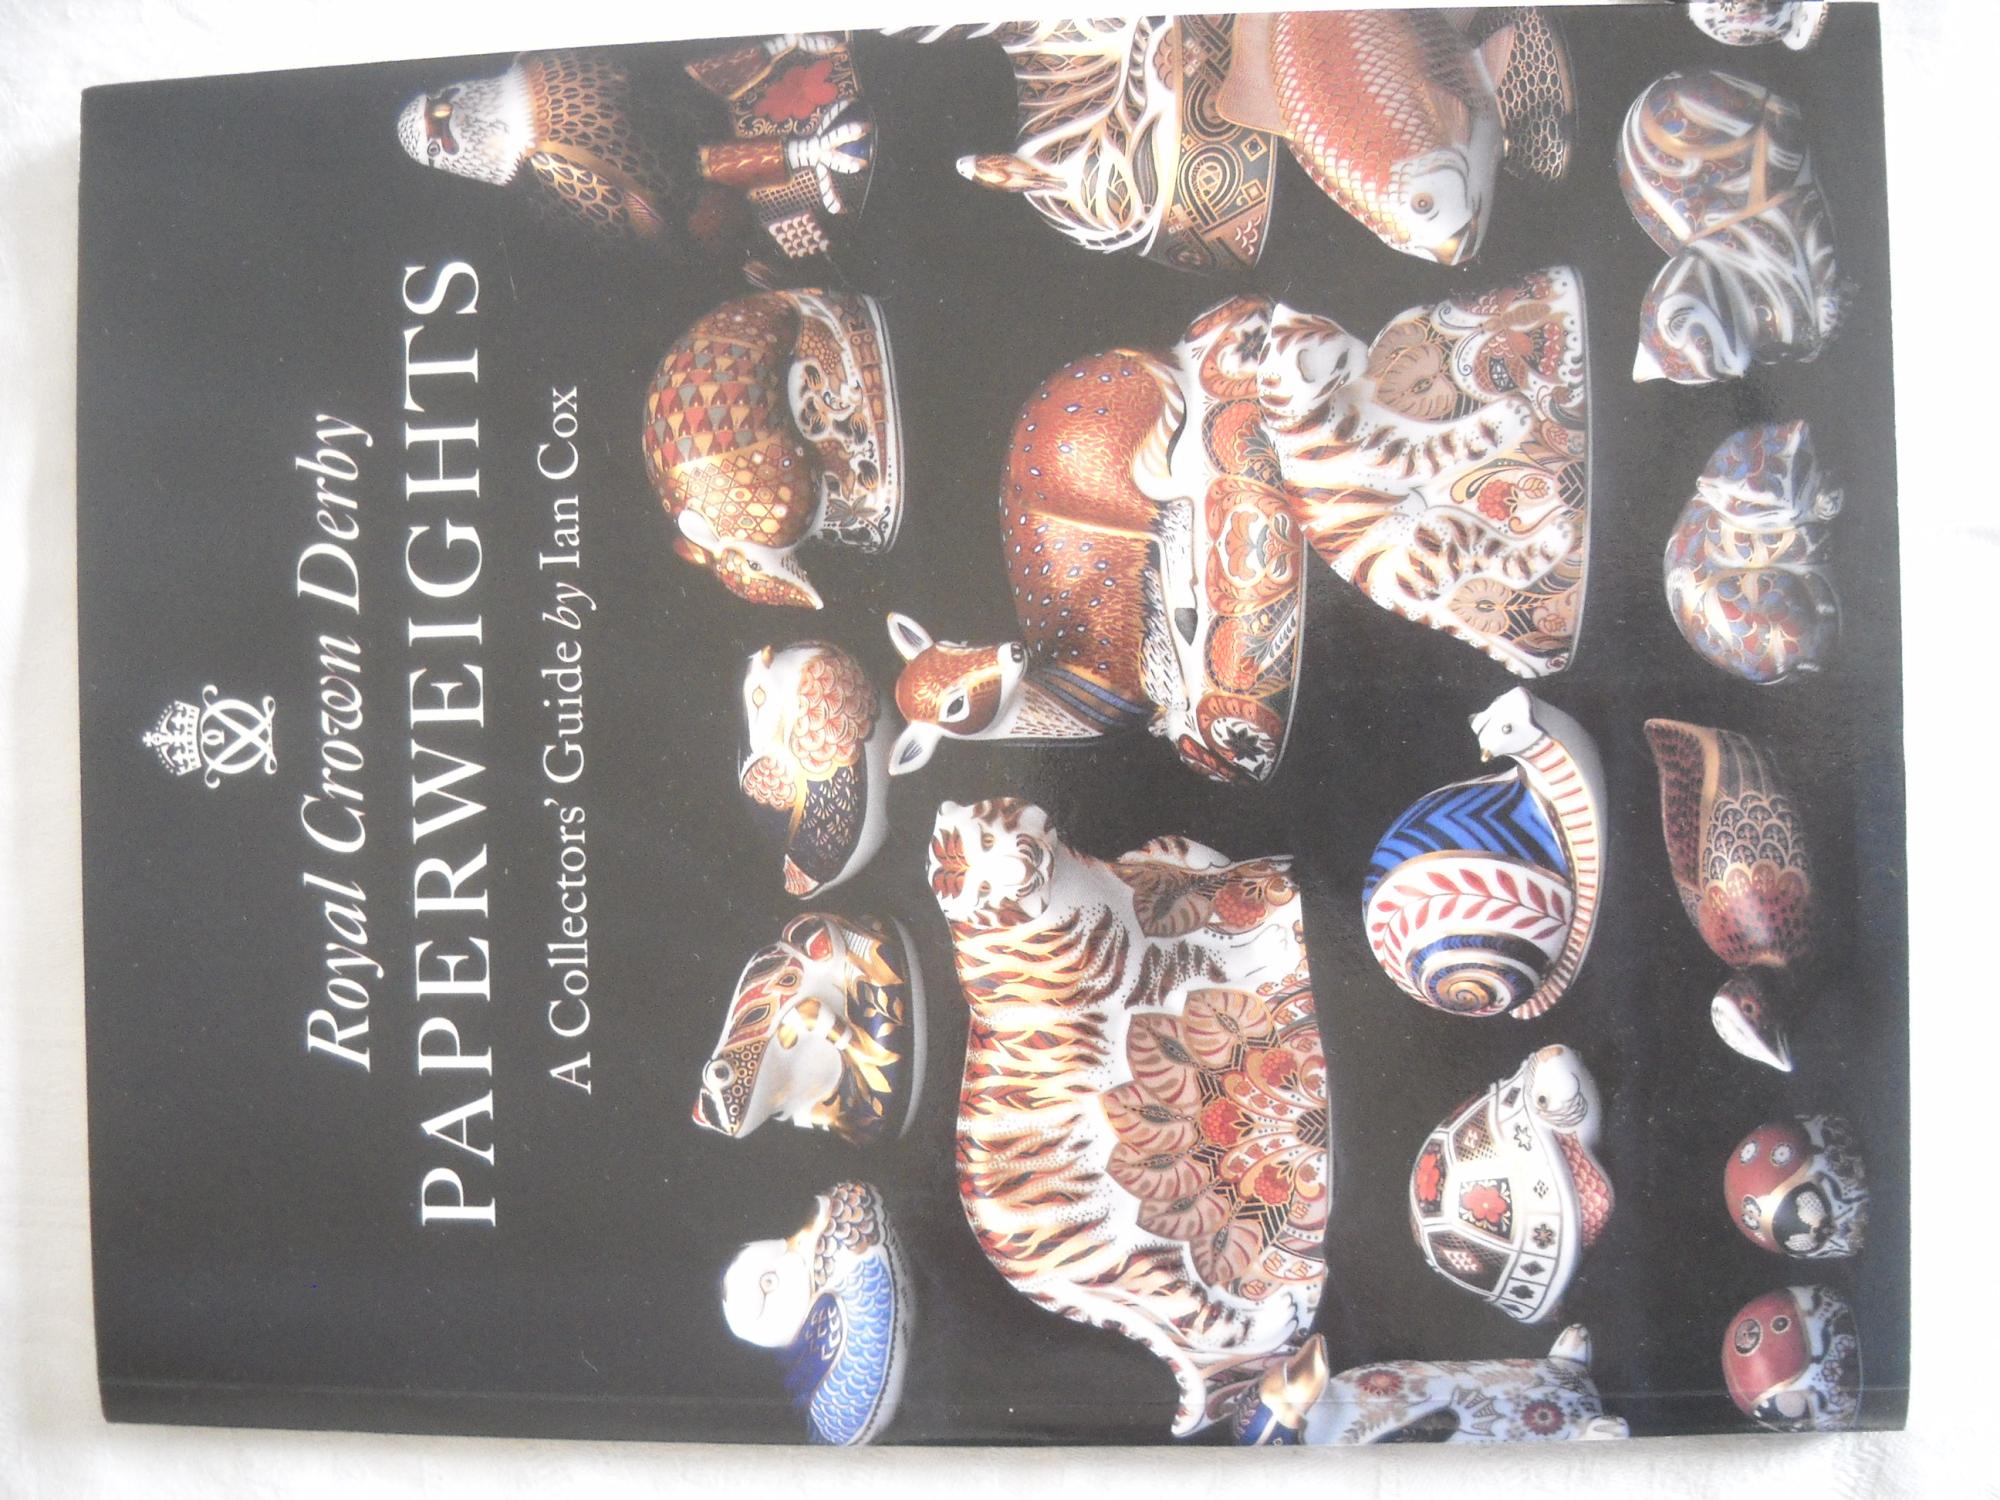 Royal Crown Derby Paperweights A Collector's Guide. by Cox Ian Very Good + Illustrated Soft